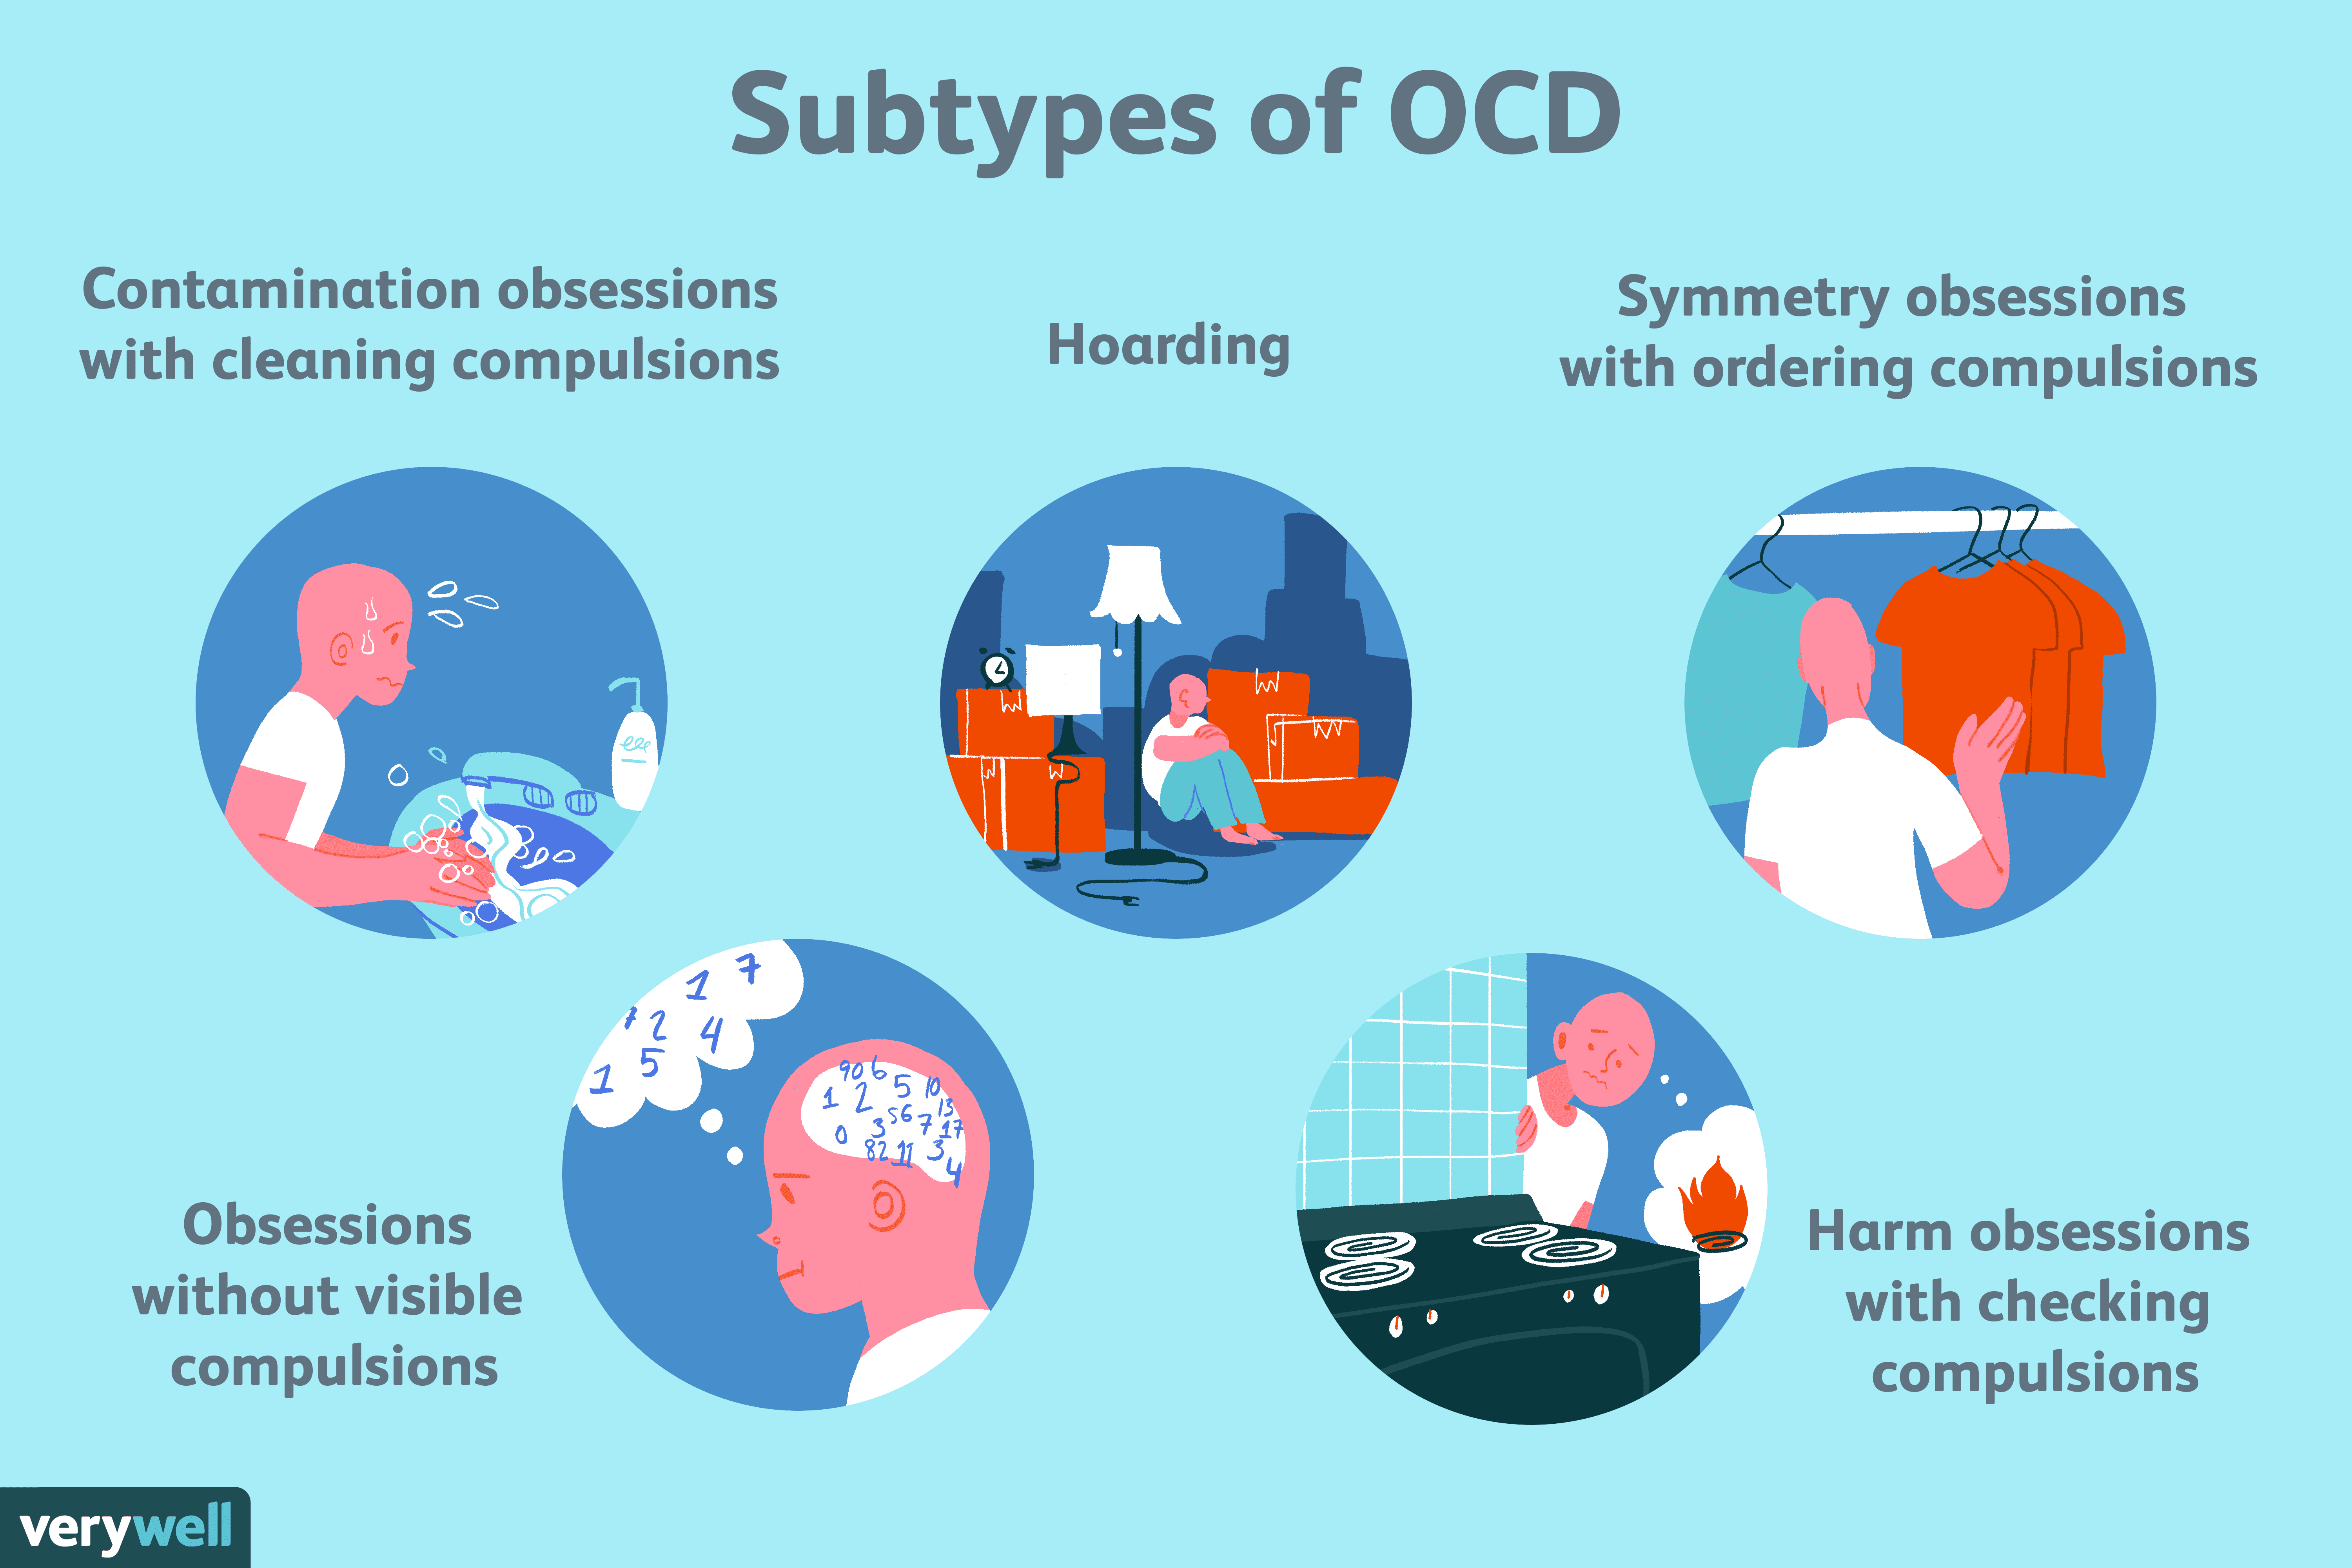 Symptoms of the Subtypes of OCD and Related Disorders